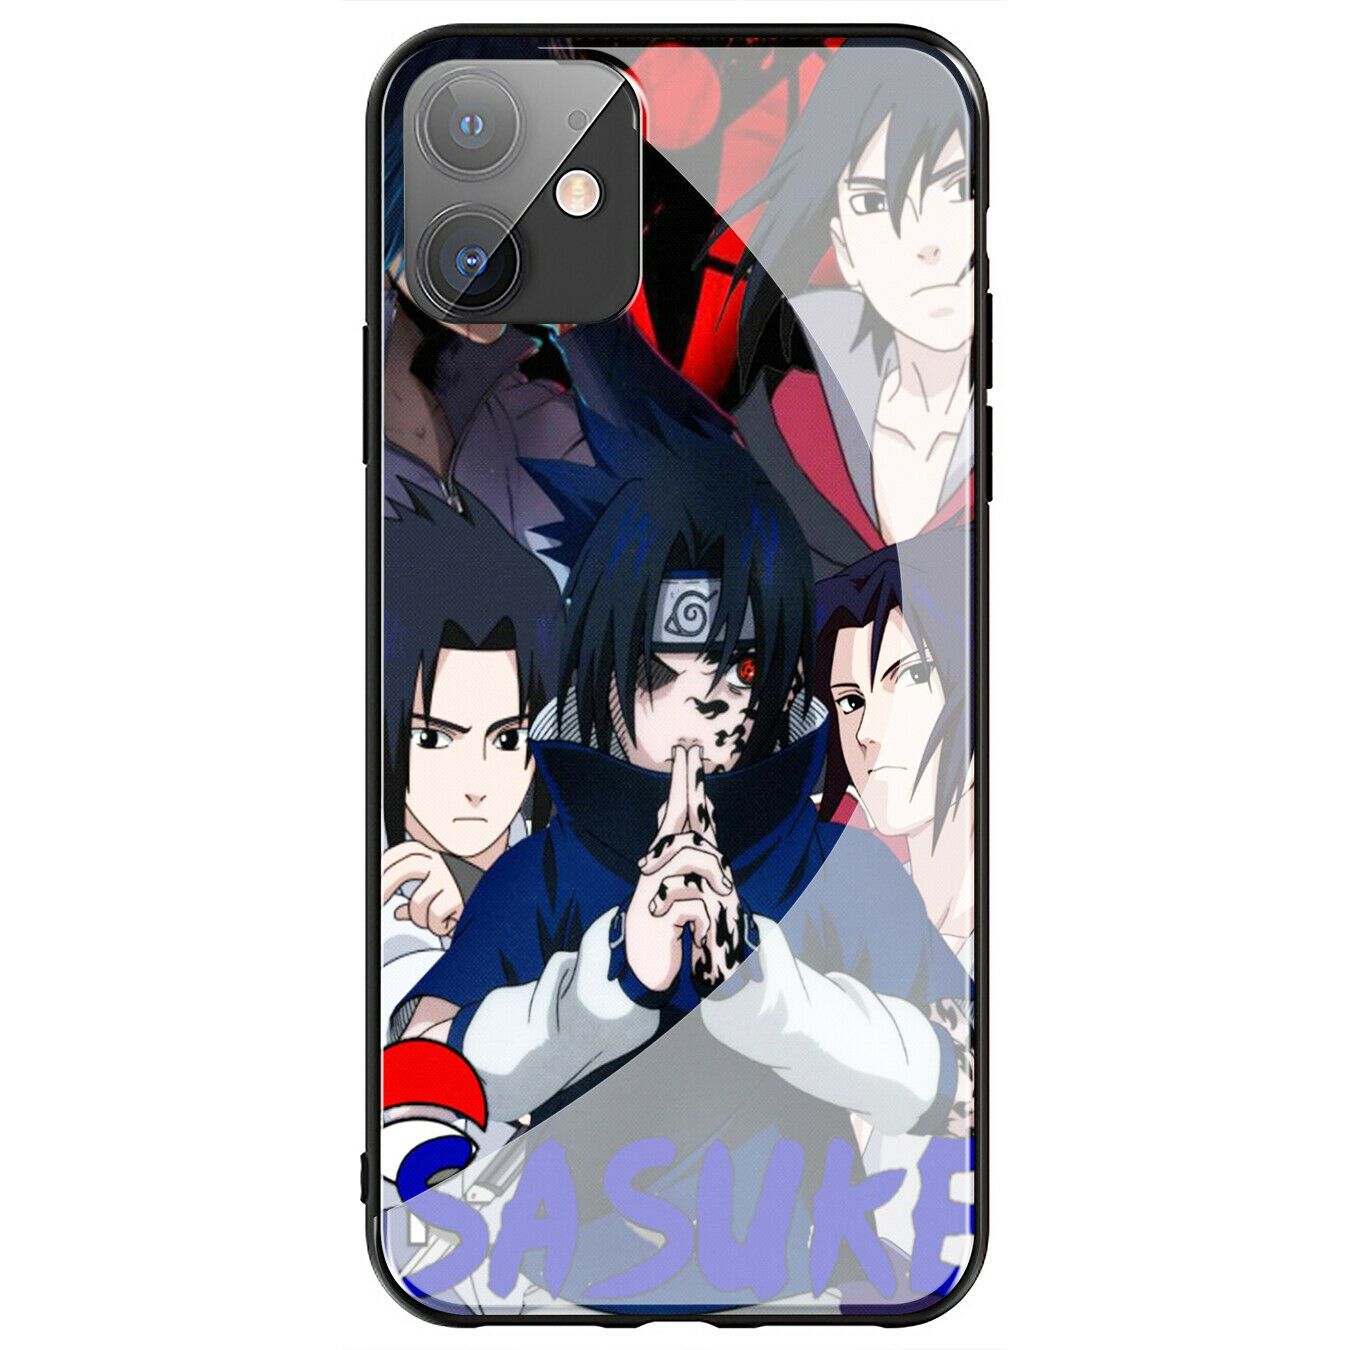 Sasuke NARUTO Akatsuki Glass Case for iPhone 11 Pro XR X XS Max 8 7 6 6s Plus + iPhone Cases AtlasCase 18 for iPhone 6/6S 